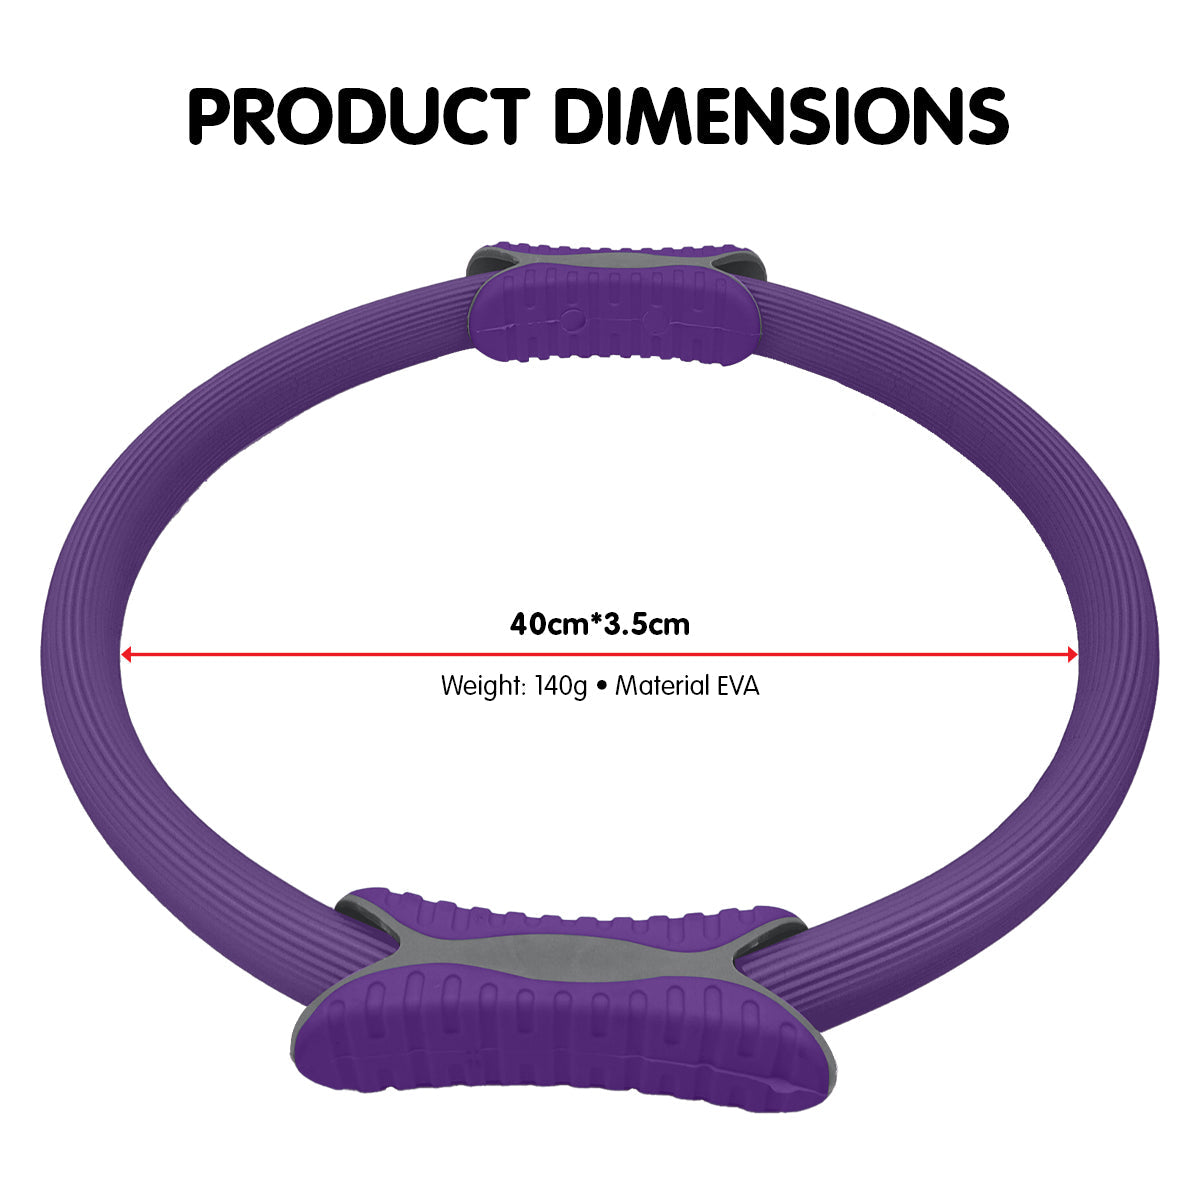 Sports & Fitness > Fitness Accessories - Powertrain Pilates Ring Band Yoga Home Workout Exercise Band Purple